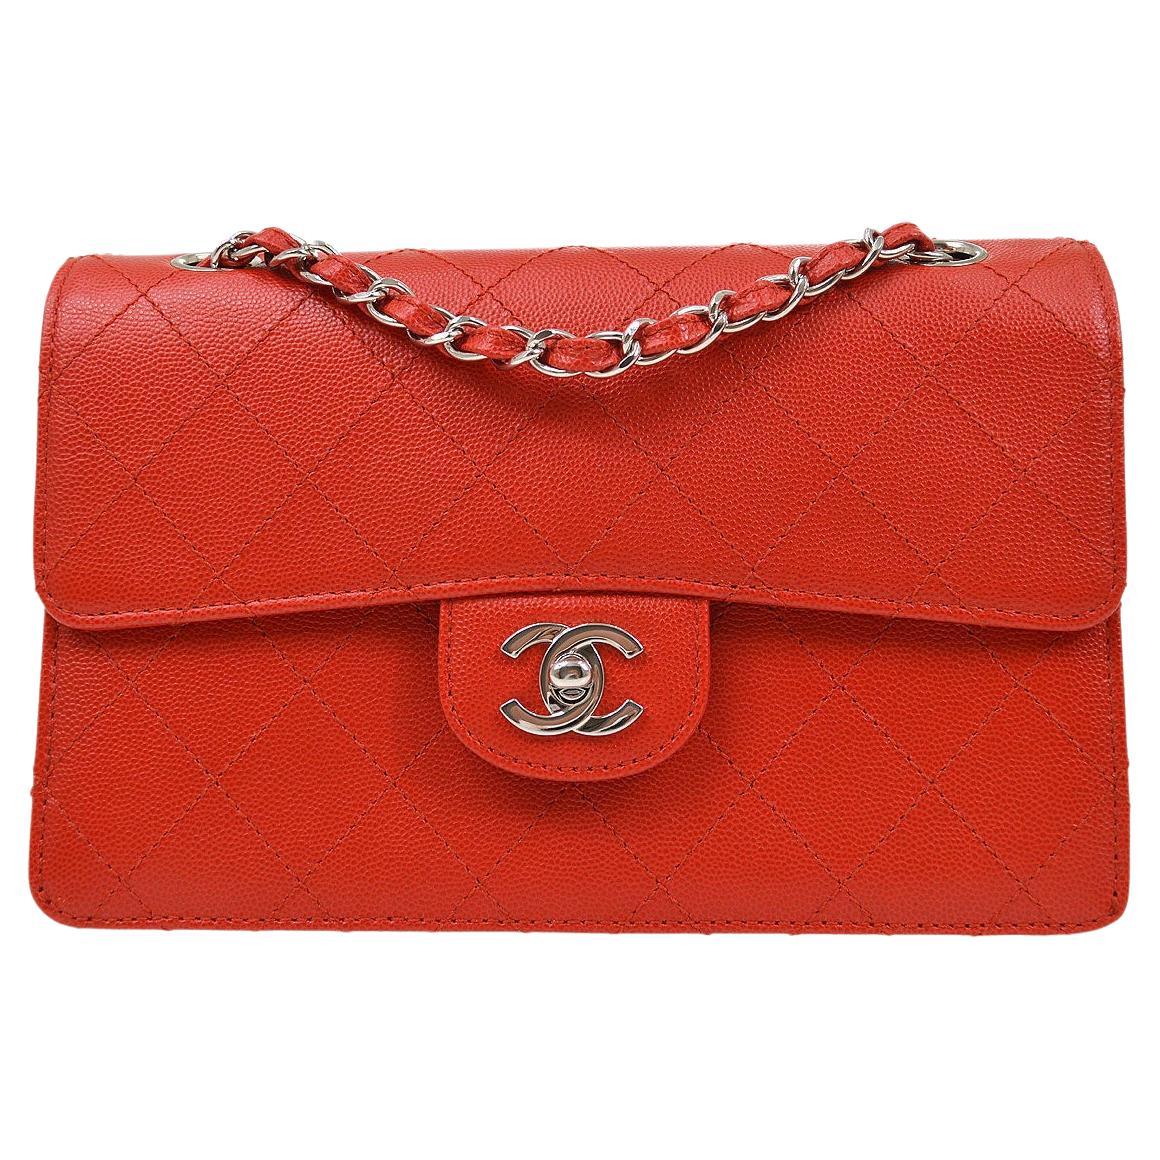 2013 Chanel Red Shiny Mississippiensis Alligator Jumbo Classic Double ...